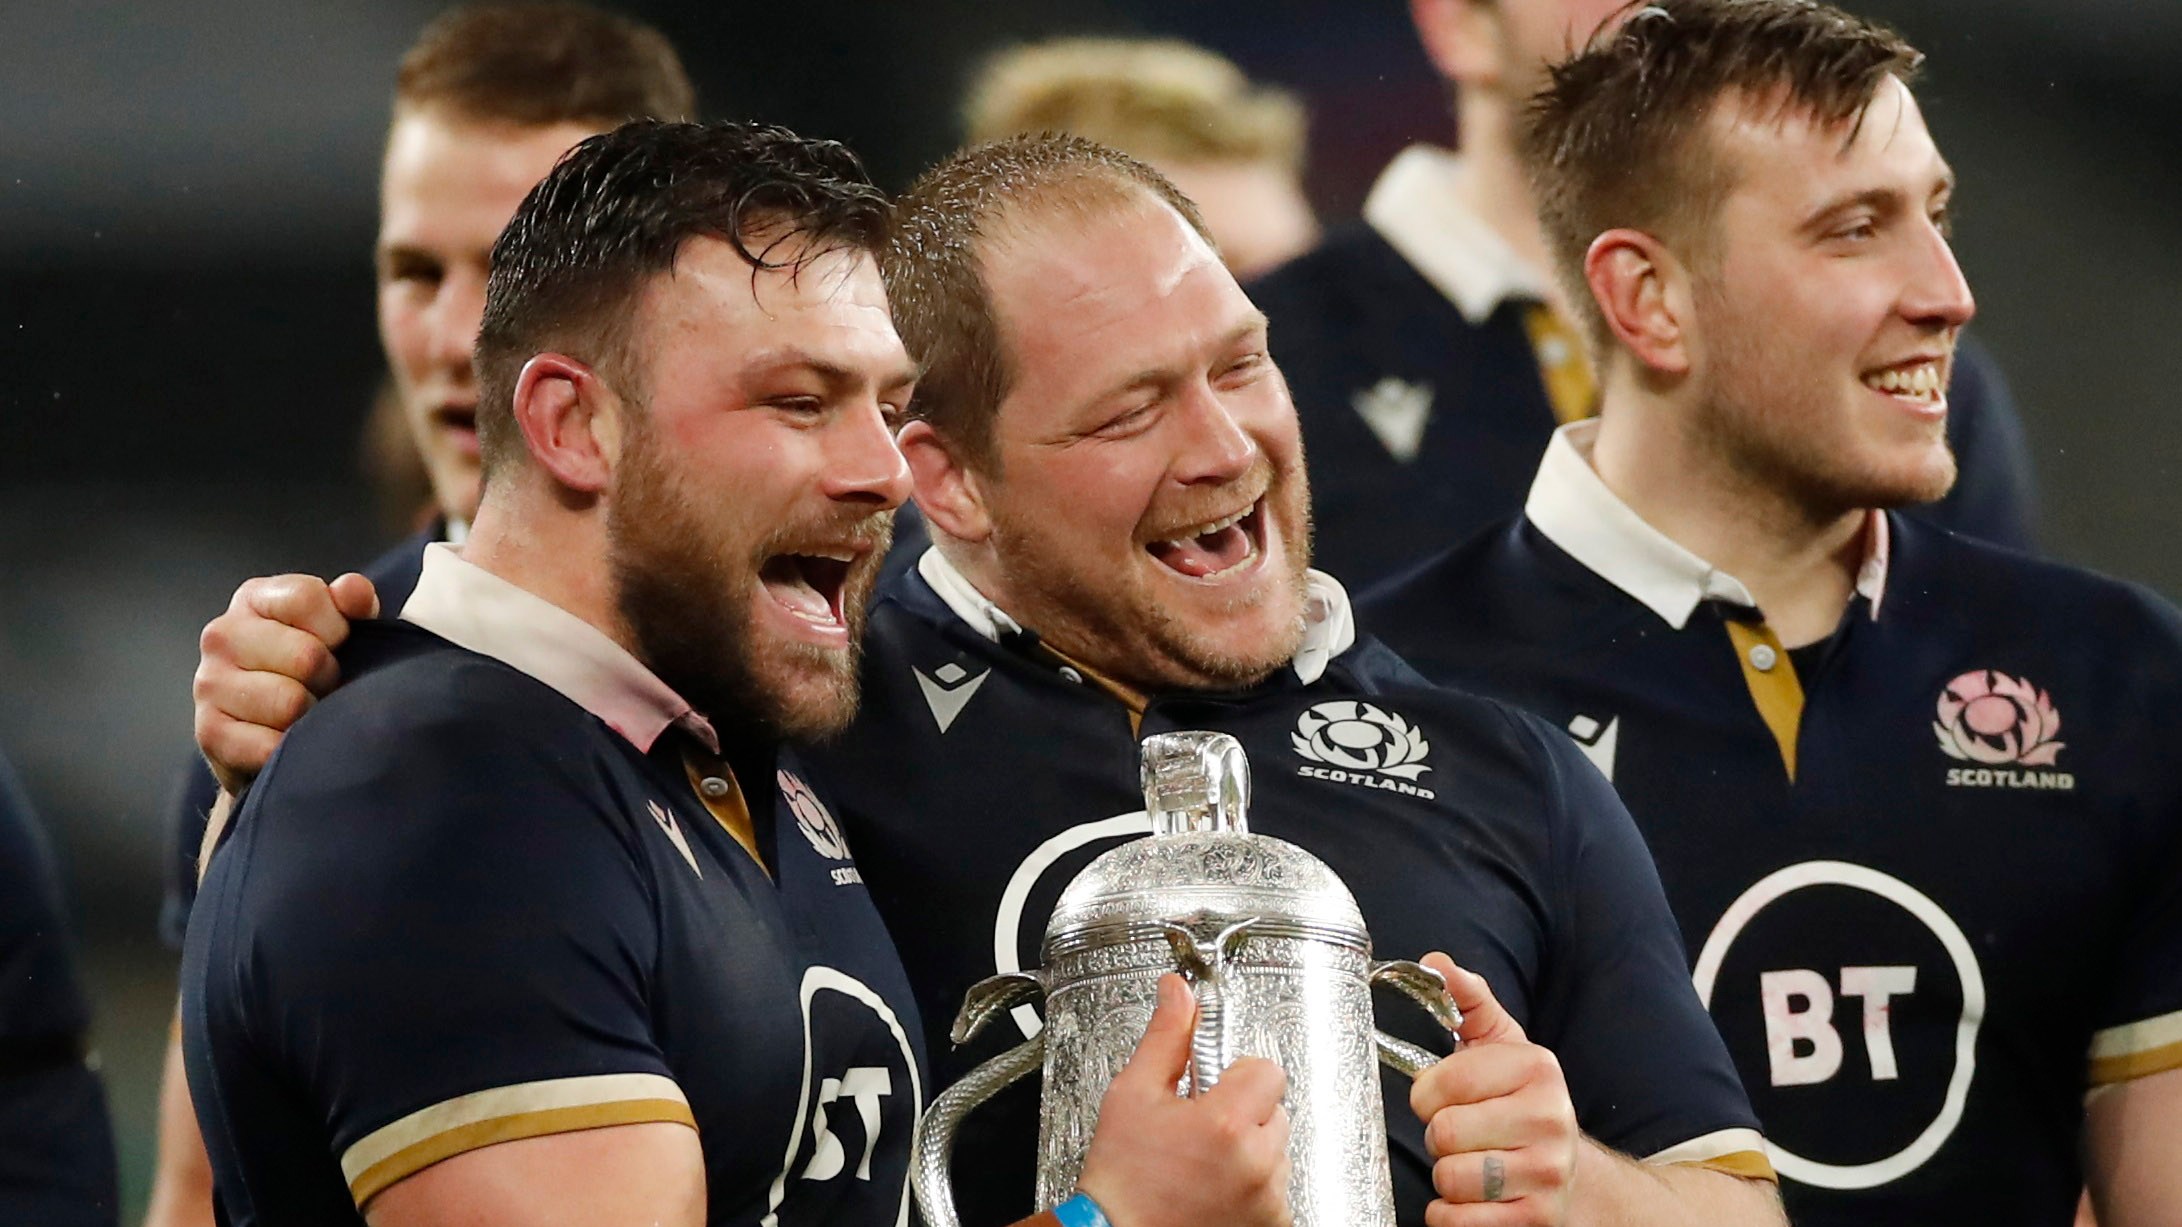 Scotland prop WP Nel to retire at the end of season